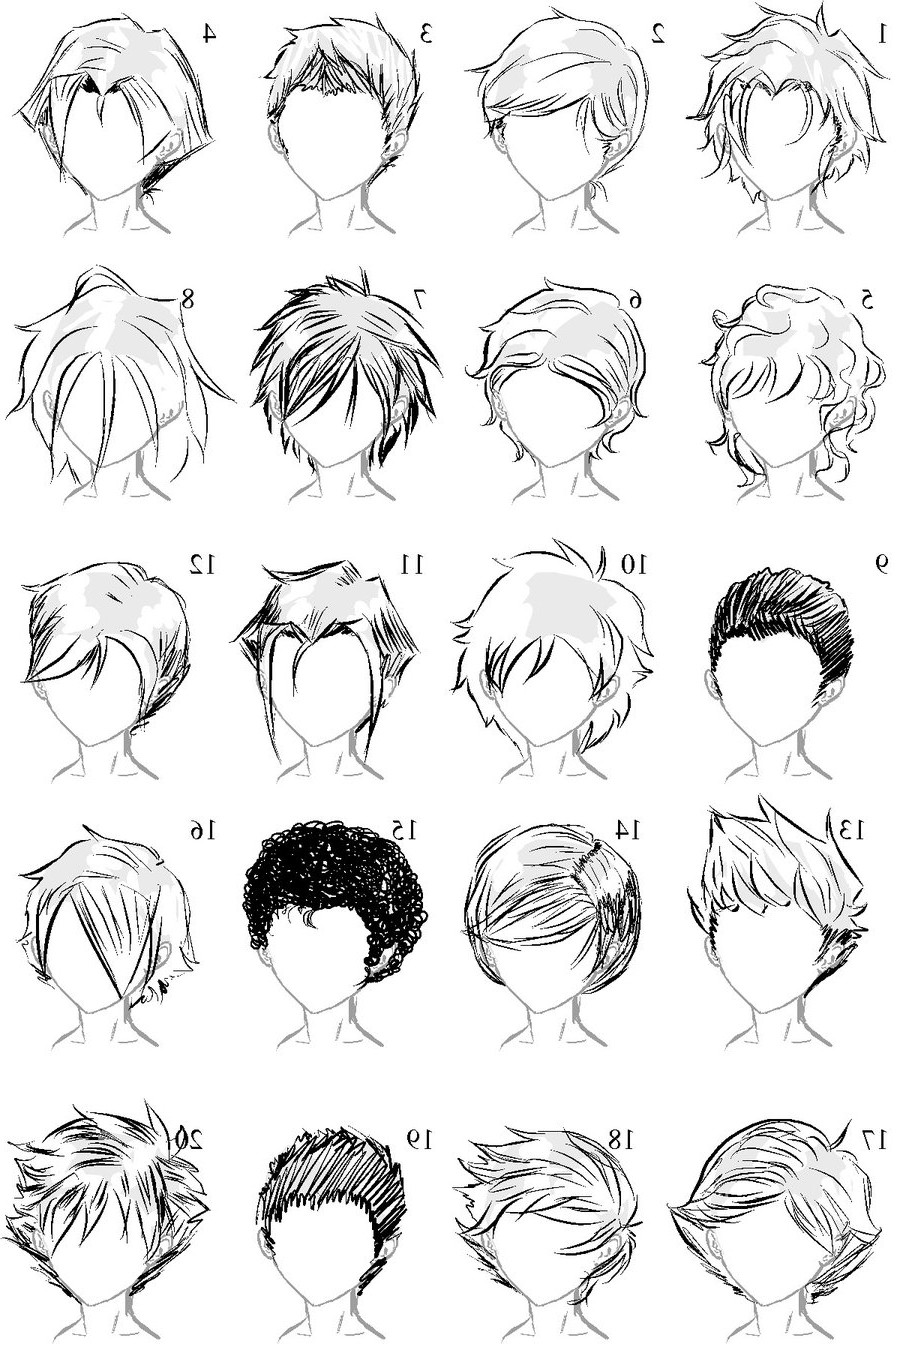 Anime Boy Hairstyles
 Male Anime Hairstyles Drawing at PaintingValley